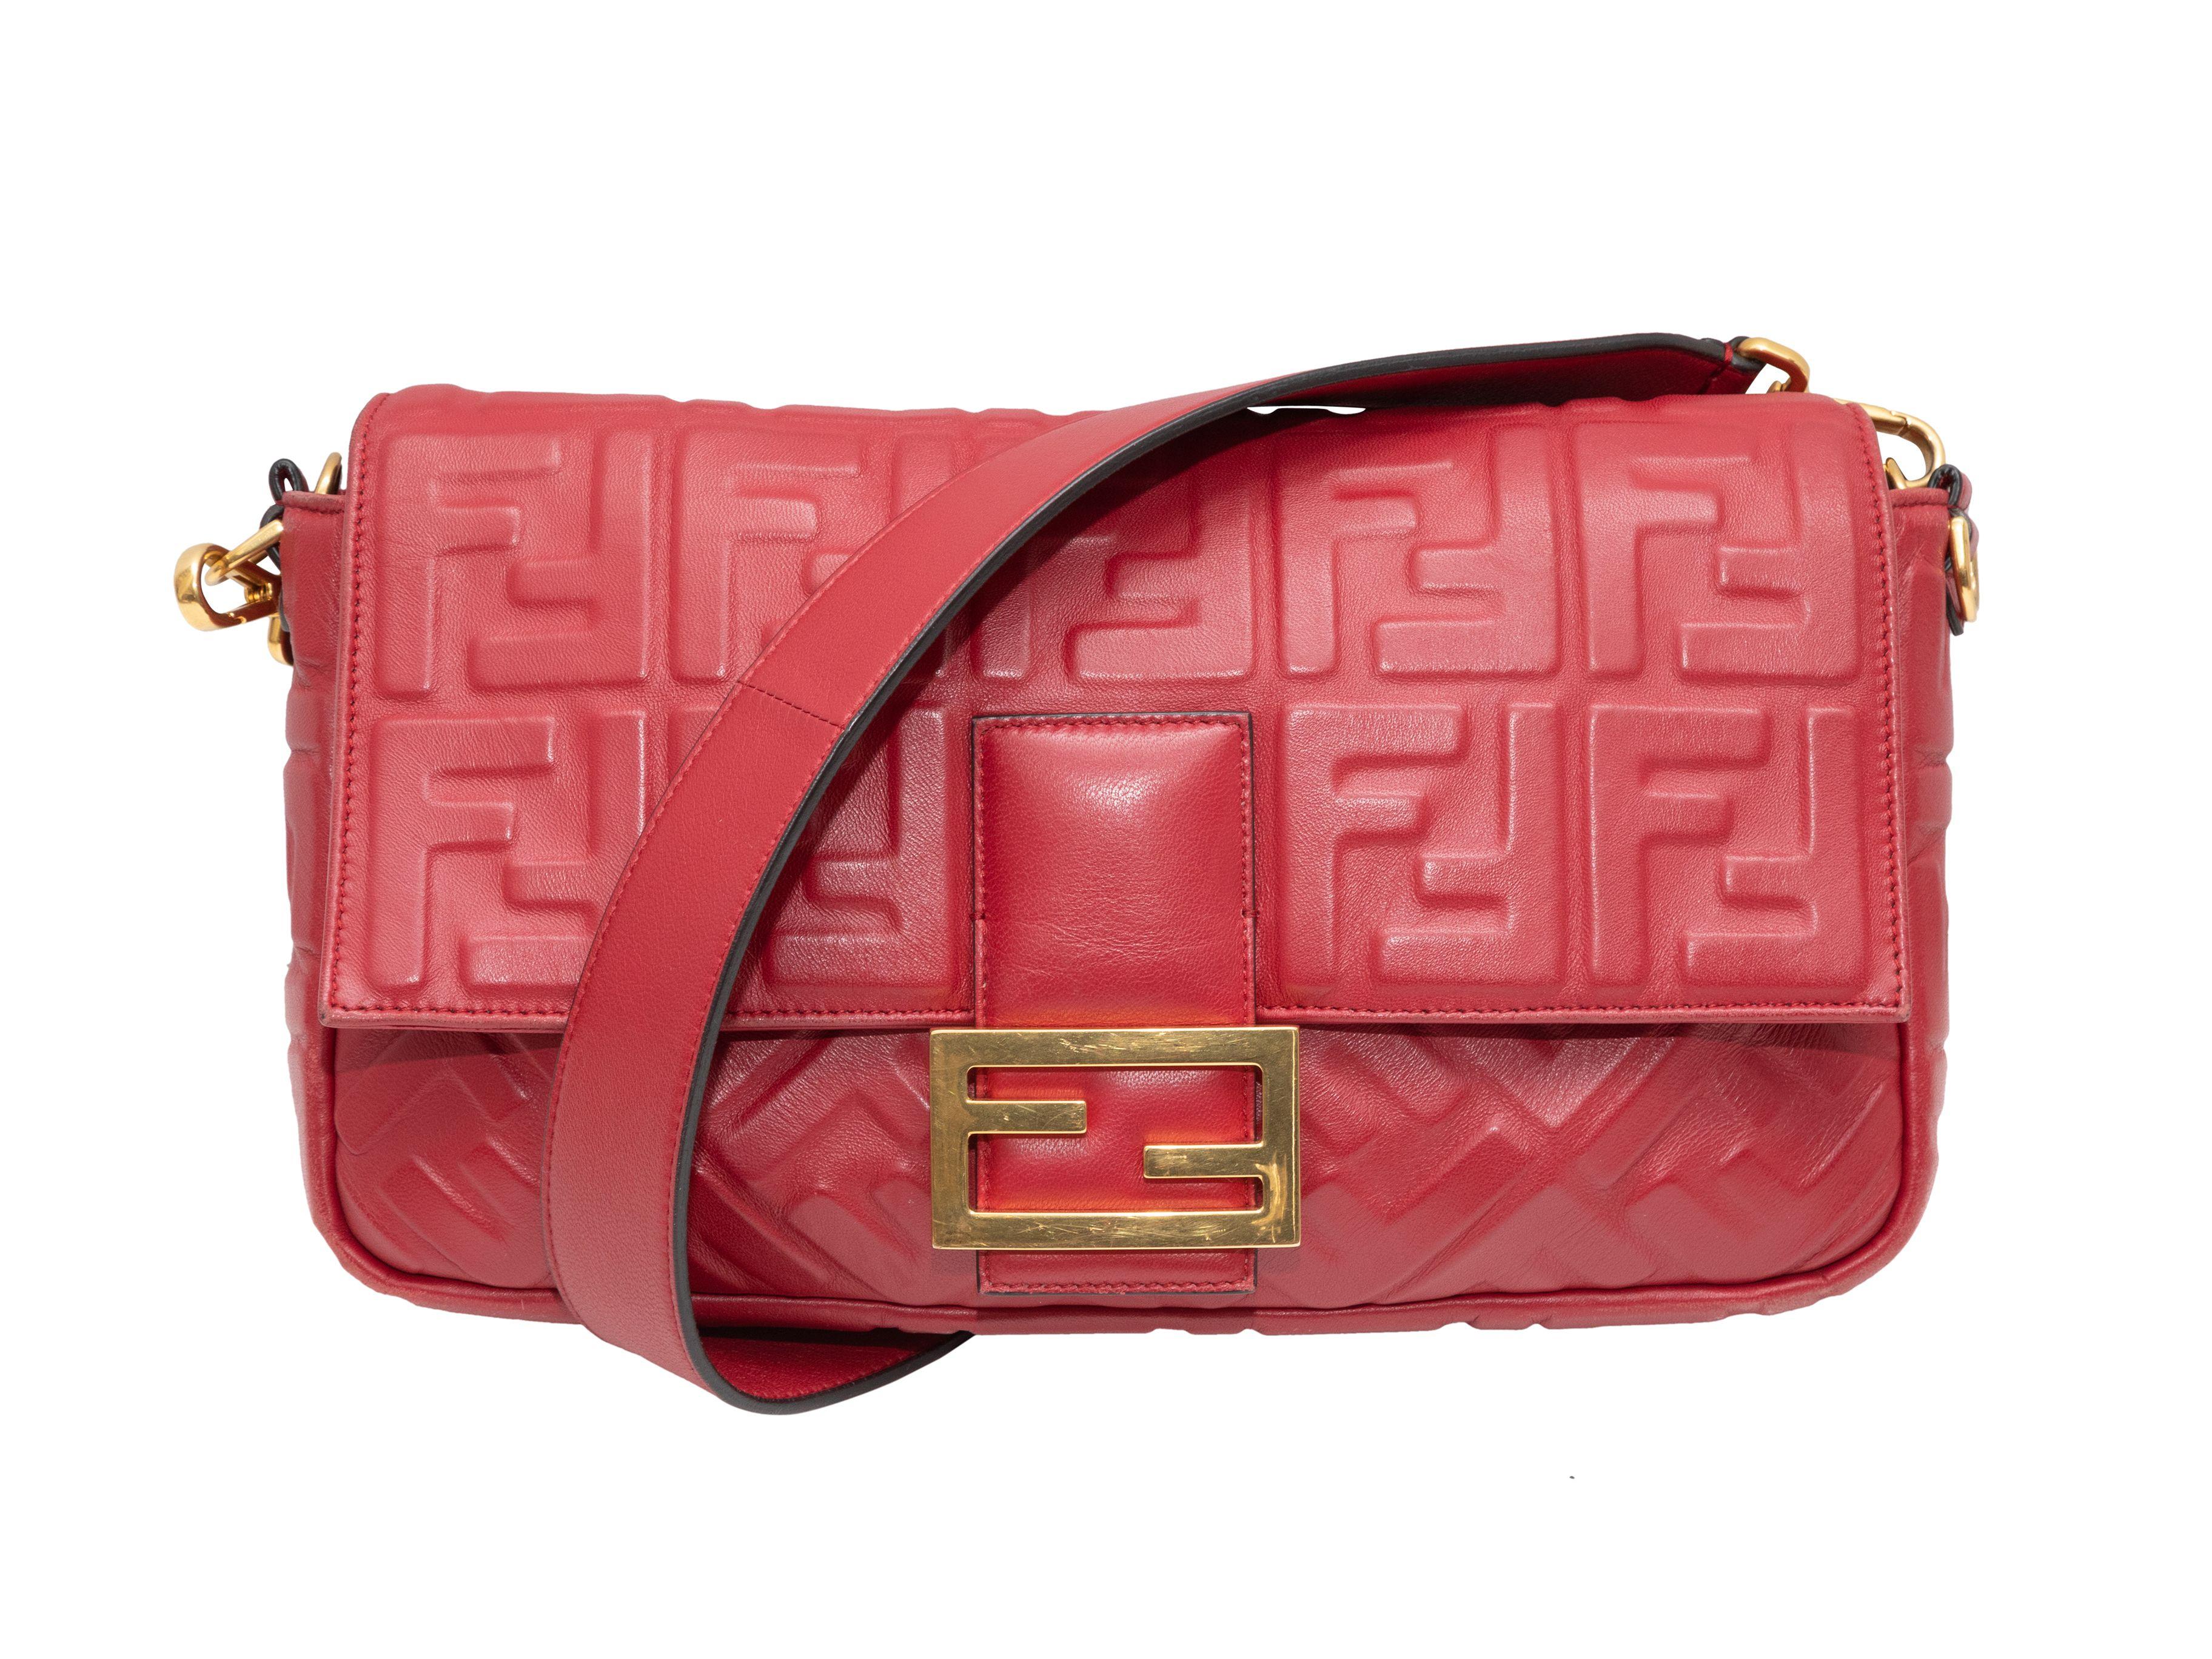 Fendi Red Embossed Leather Zucca NM Baguette Bag 2